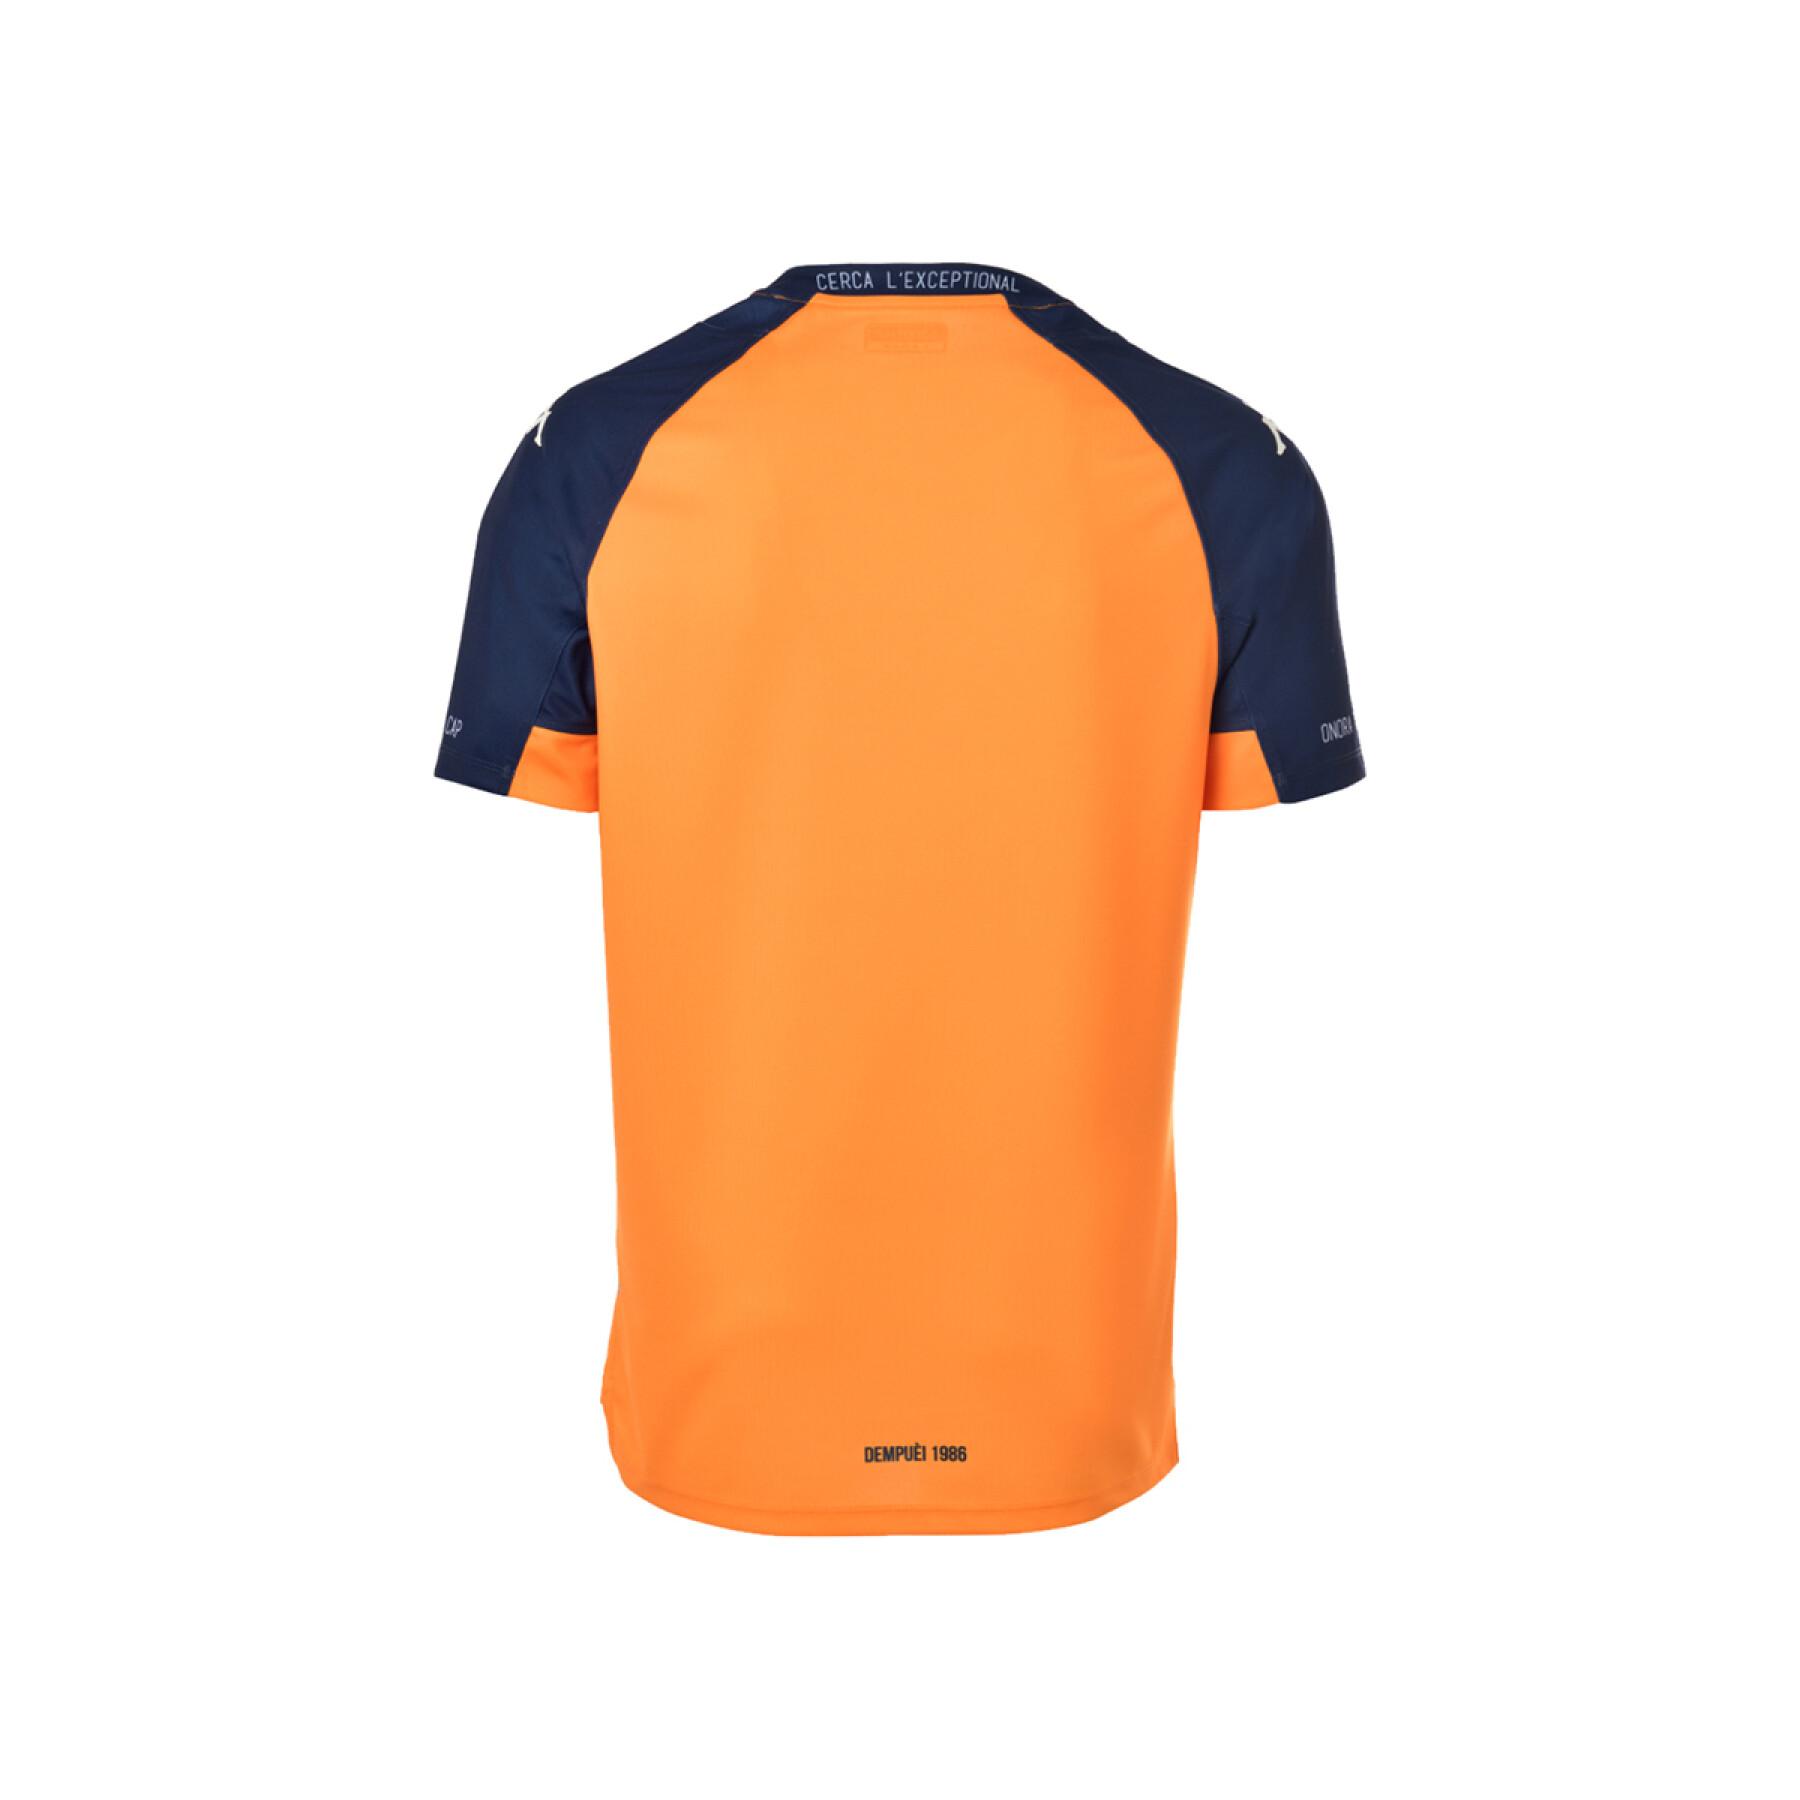 Drittes Trikot Montpellier Hérault Rugby 2019/20